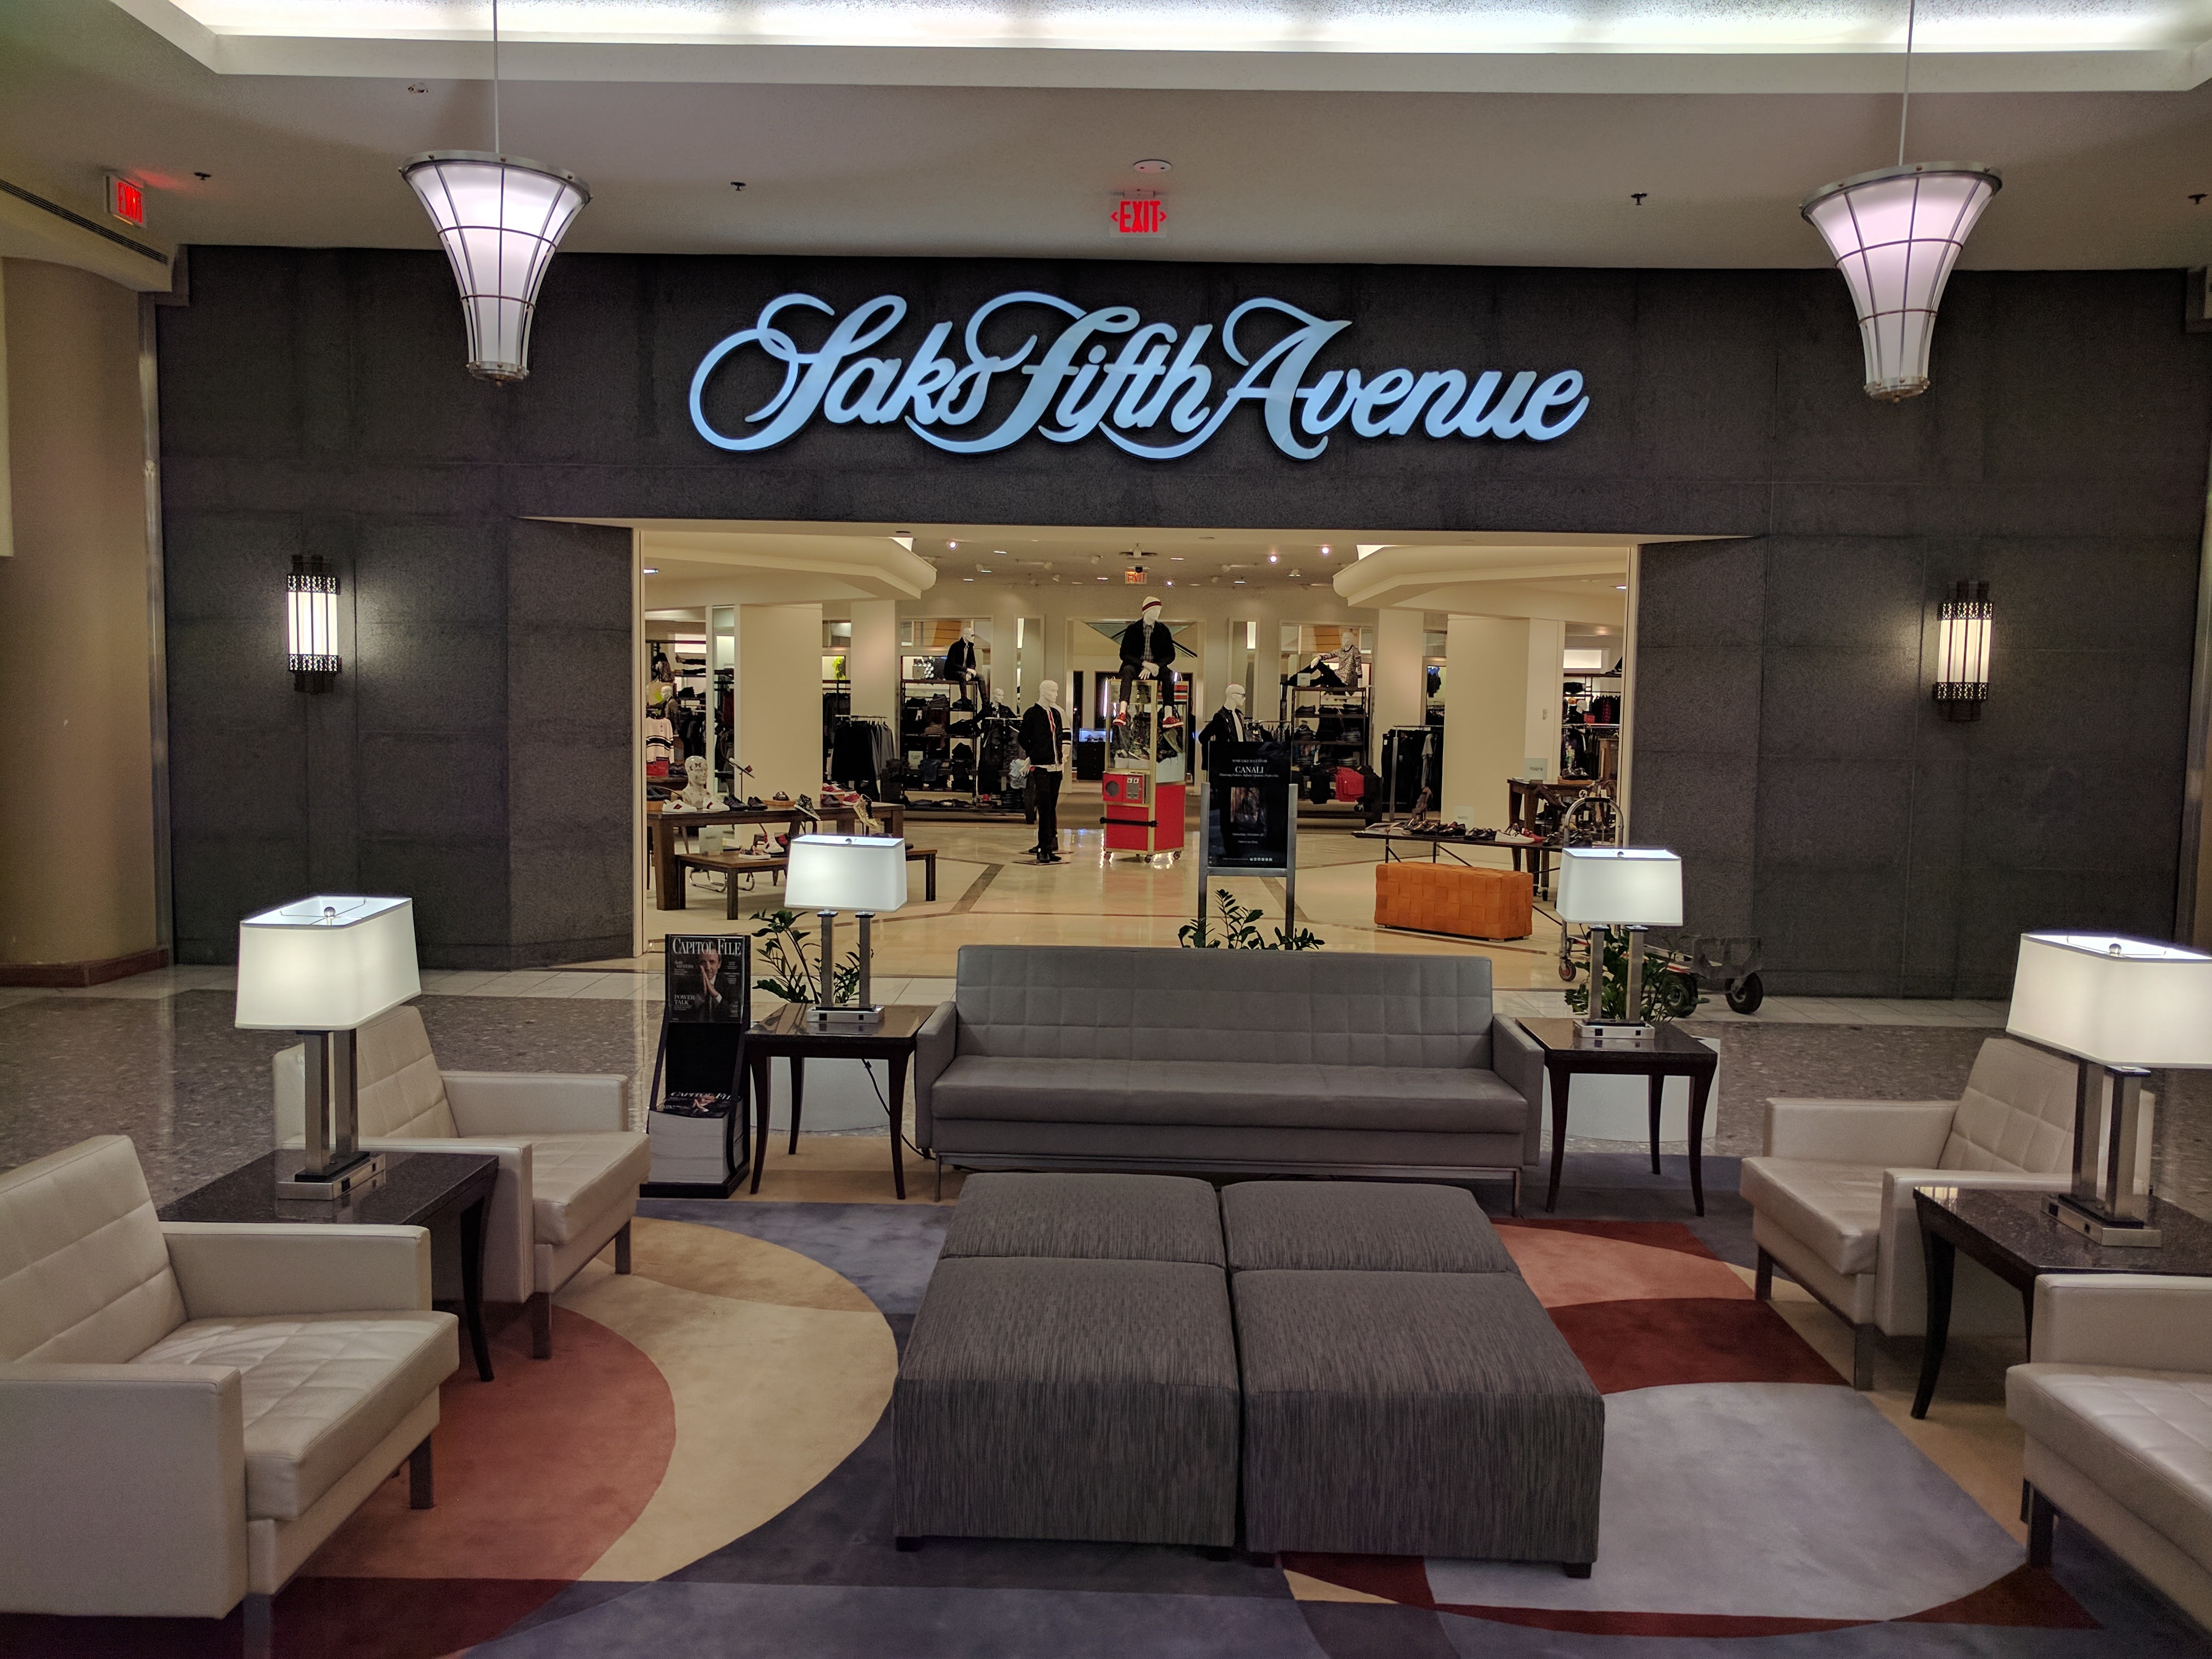 Saks Fifth Avenue Troy, Somerset Collection is a massive lu…